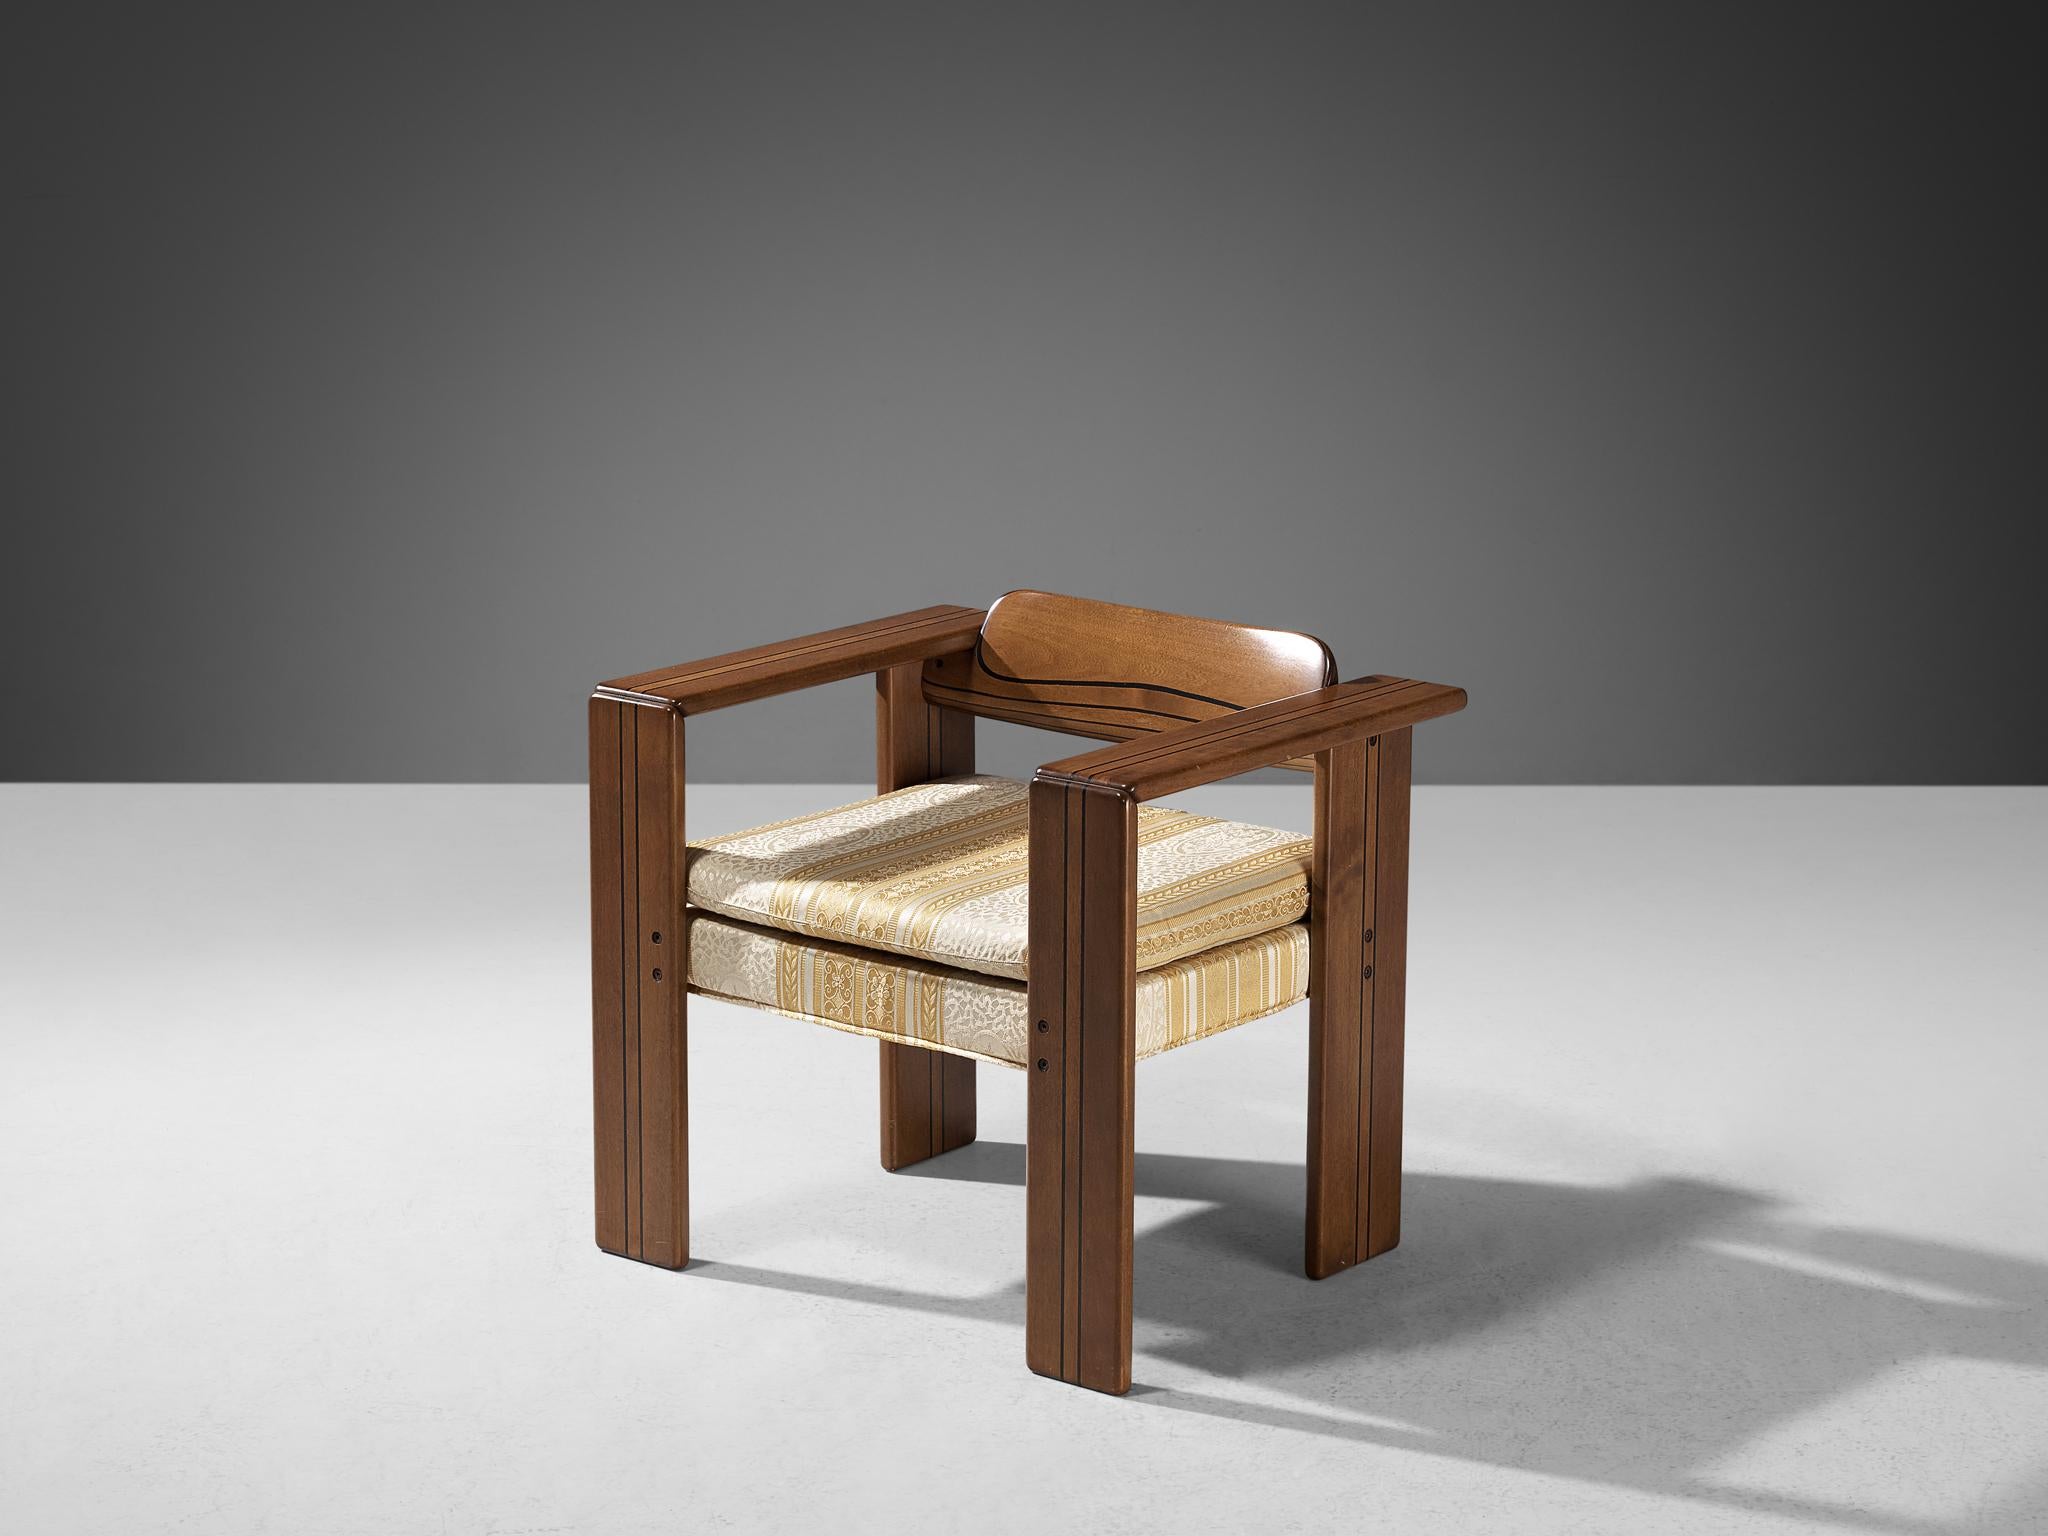 Afra & Tobia Scarpa for Maxalto, 'Artona' lounge chairs, elm, checkered fabric, Italy, 1975

Cubic ‘Artona’ lounge chair by Italian designer couple Afra and Tobia Scarpa. This chair show absolute stunning craftsmanship. Highlight is the